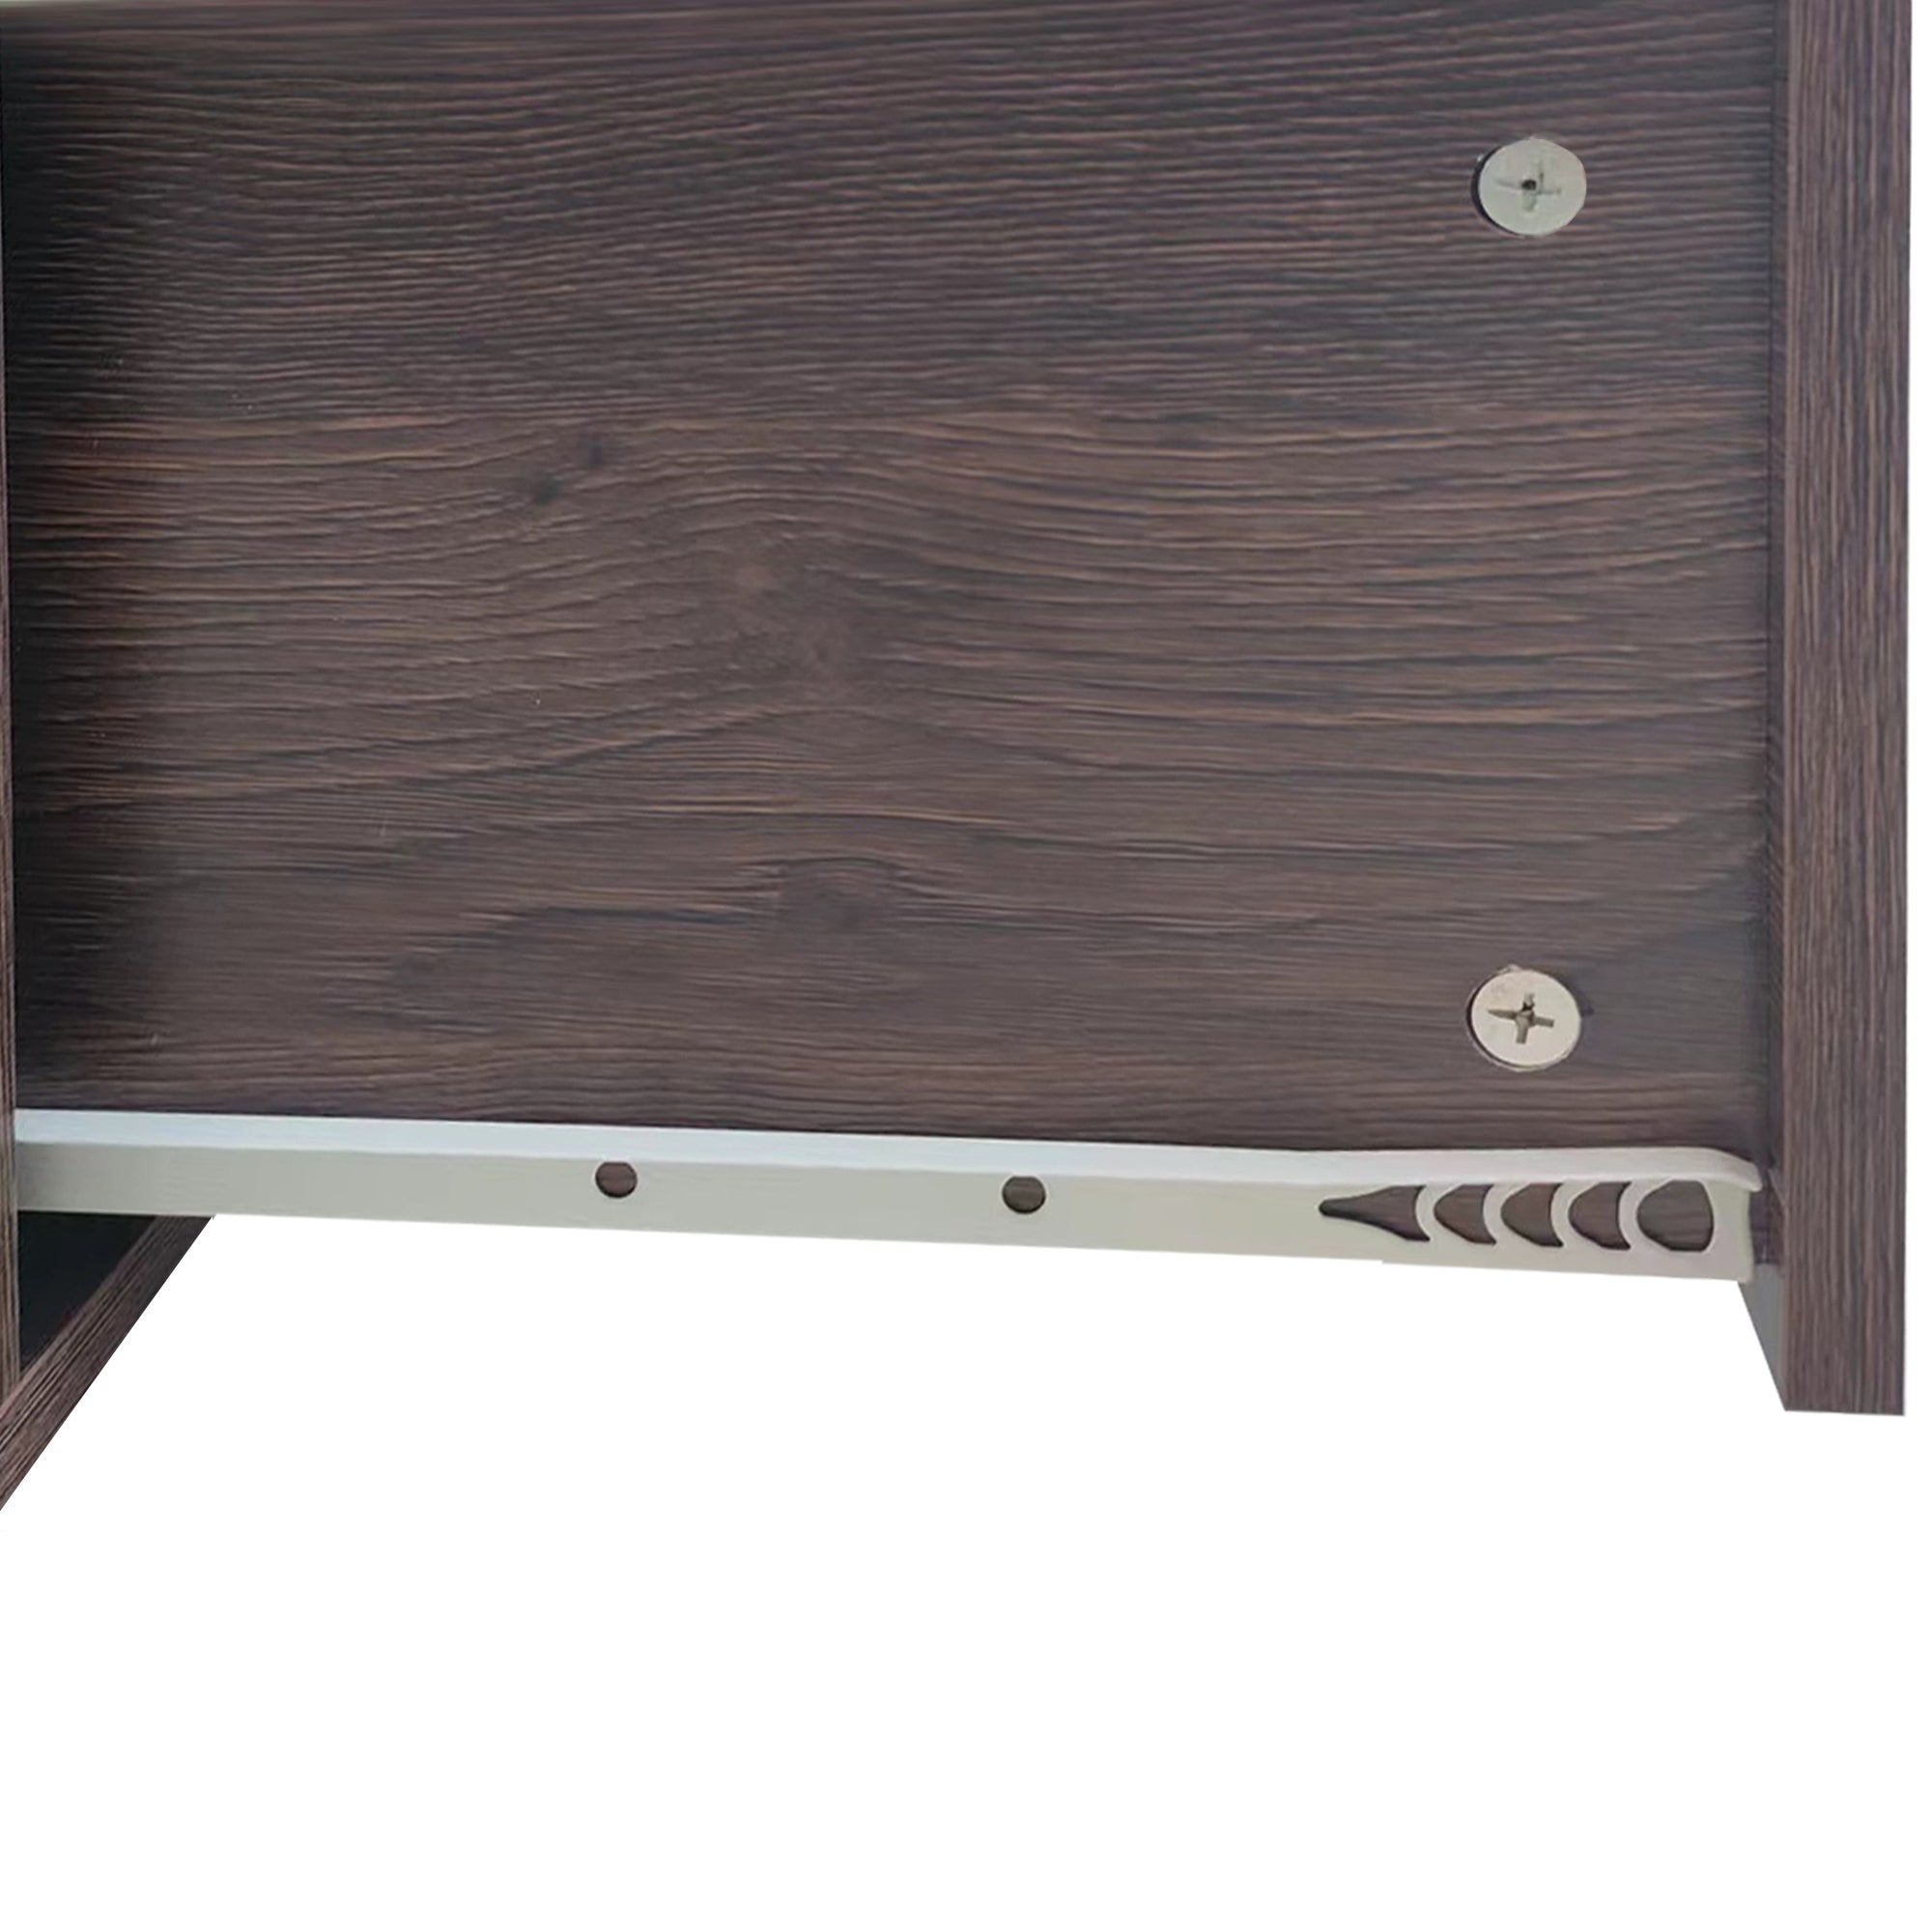 Office Pulley Removable File Cabinet (Brown Oak)